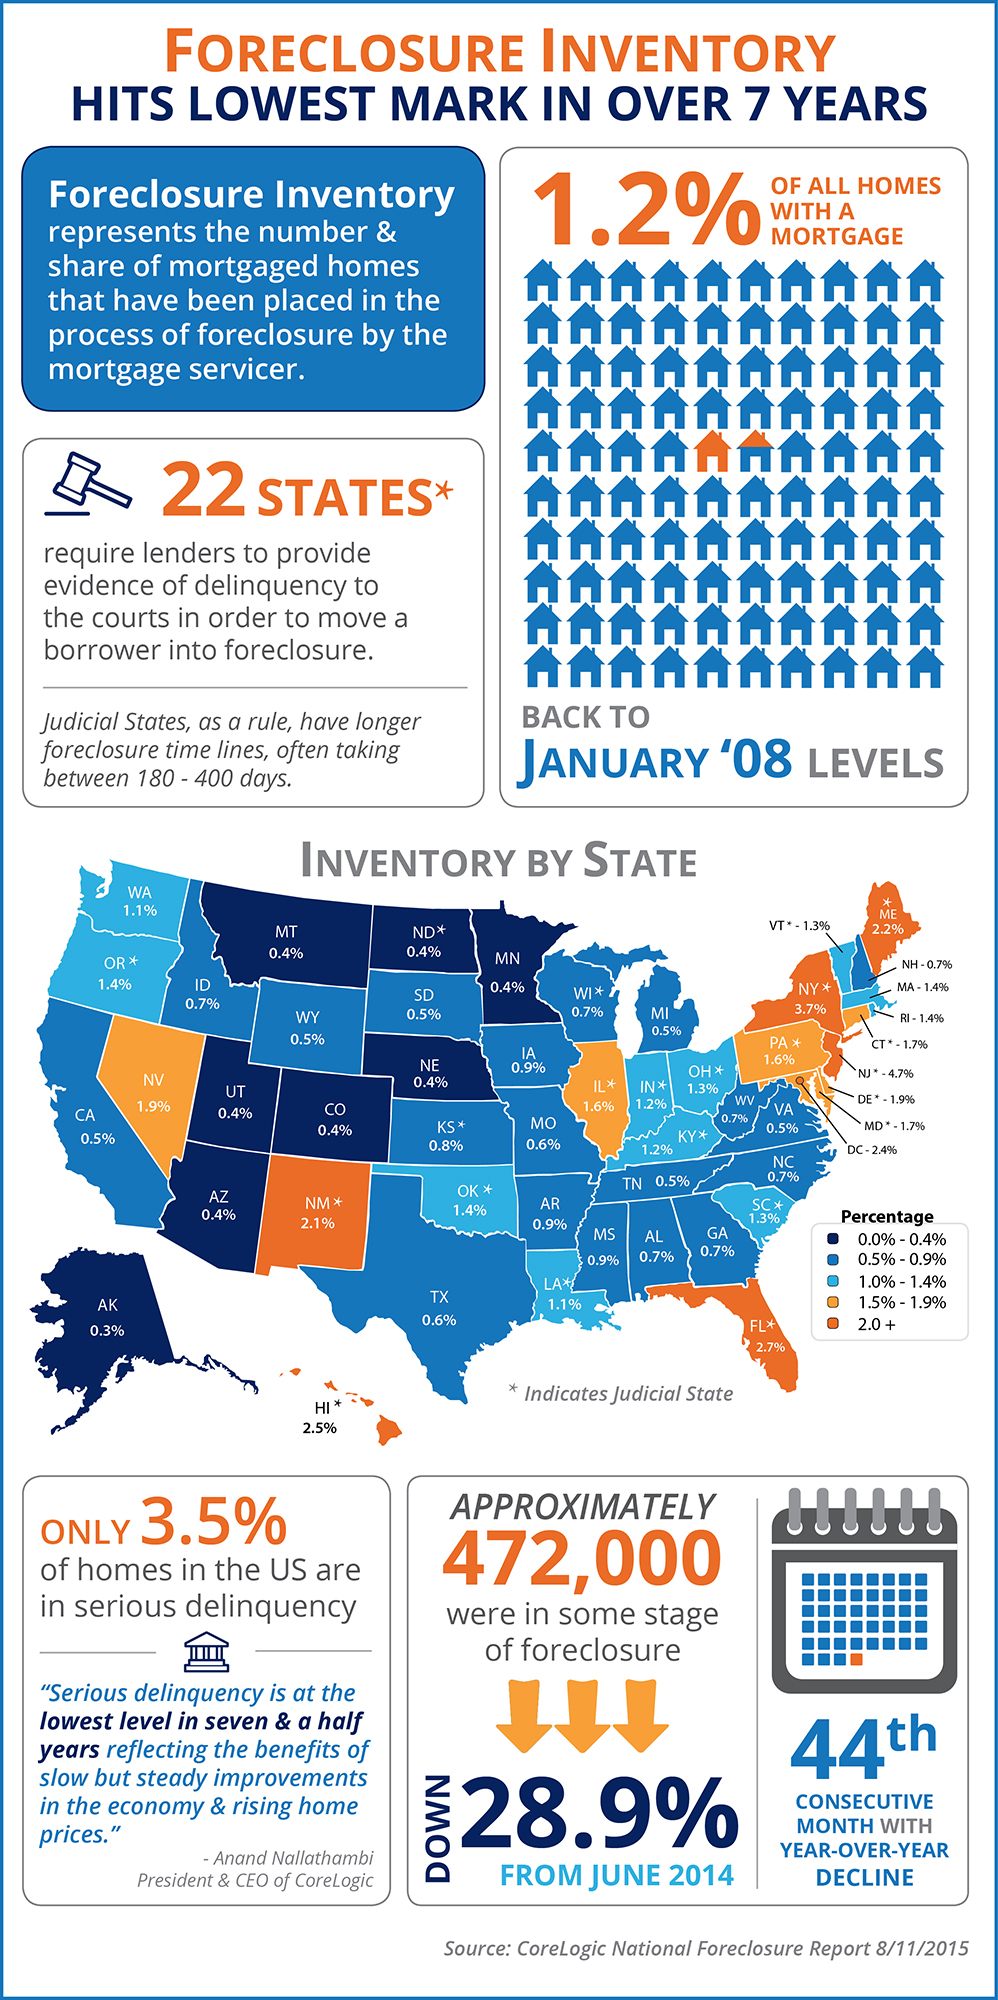 Foreclosure Inventory Hits Lowest Mark in Over 7 Years [INFOGRAPHIC] | Simplifying The Market